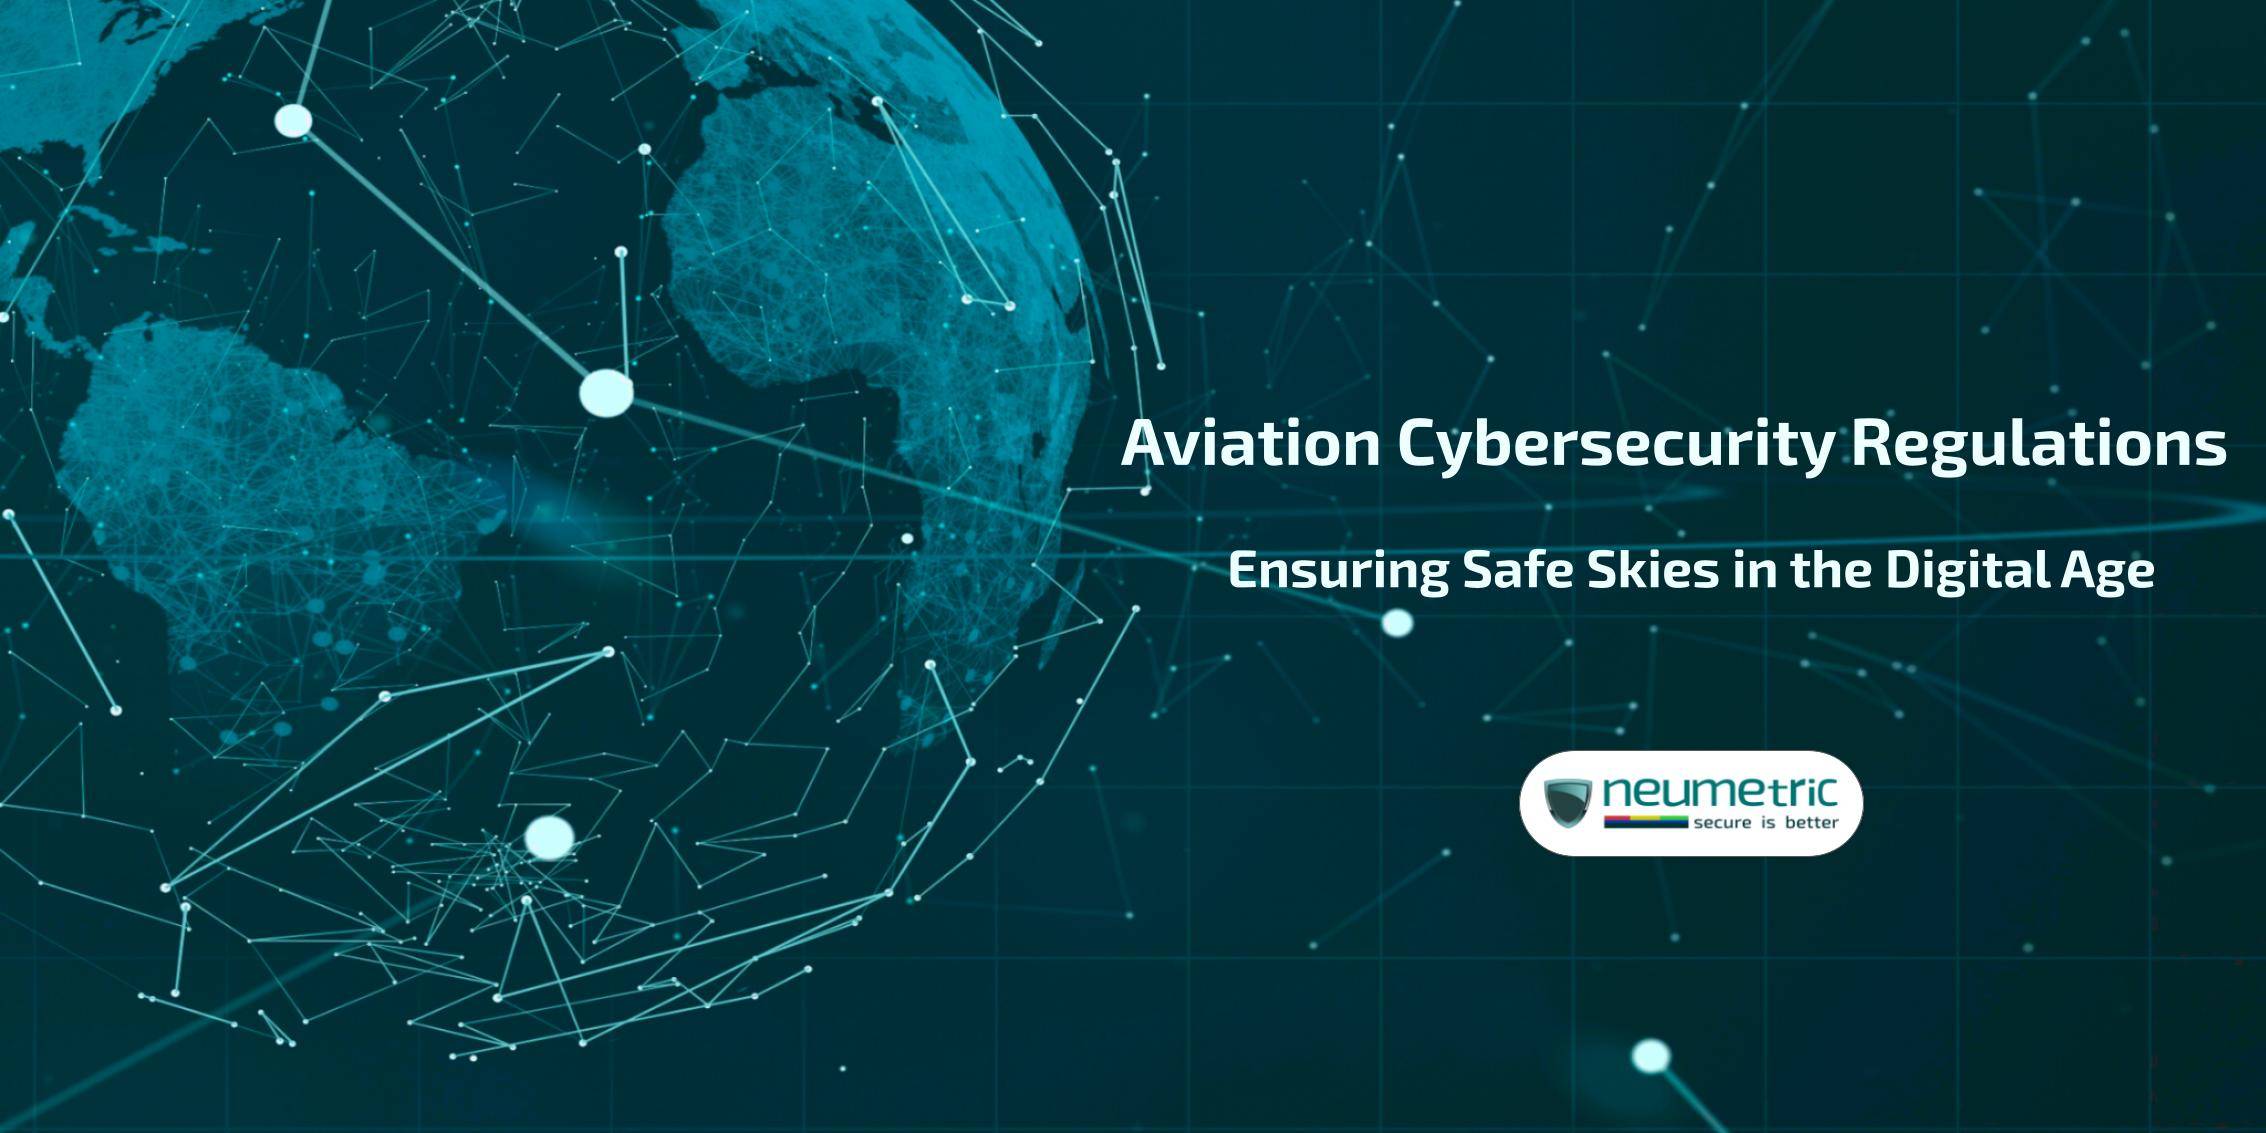 Aviation Cybersecurity Regulations: Ensuring Safe Skies in the Digital Age